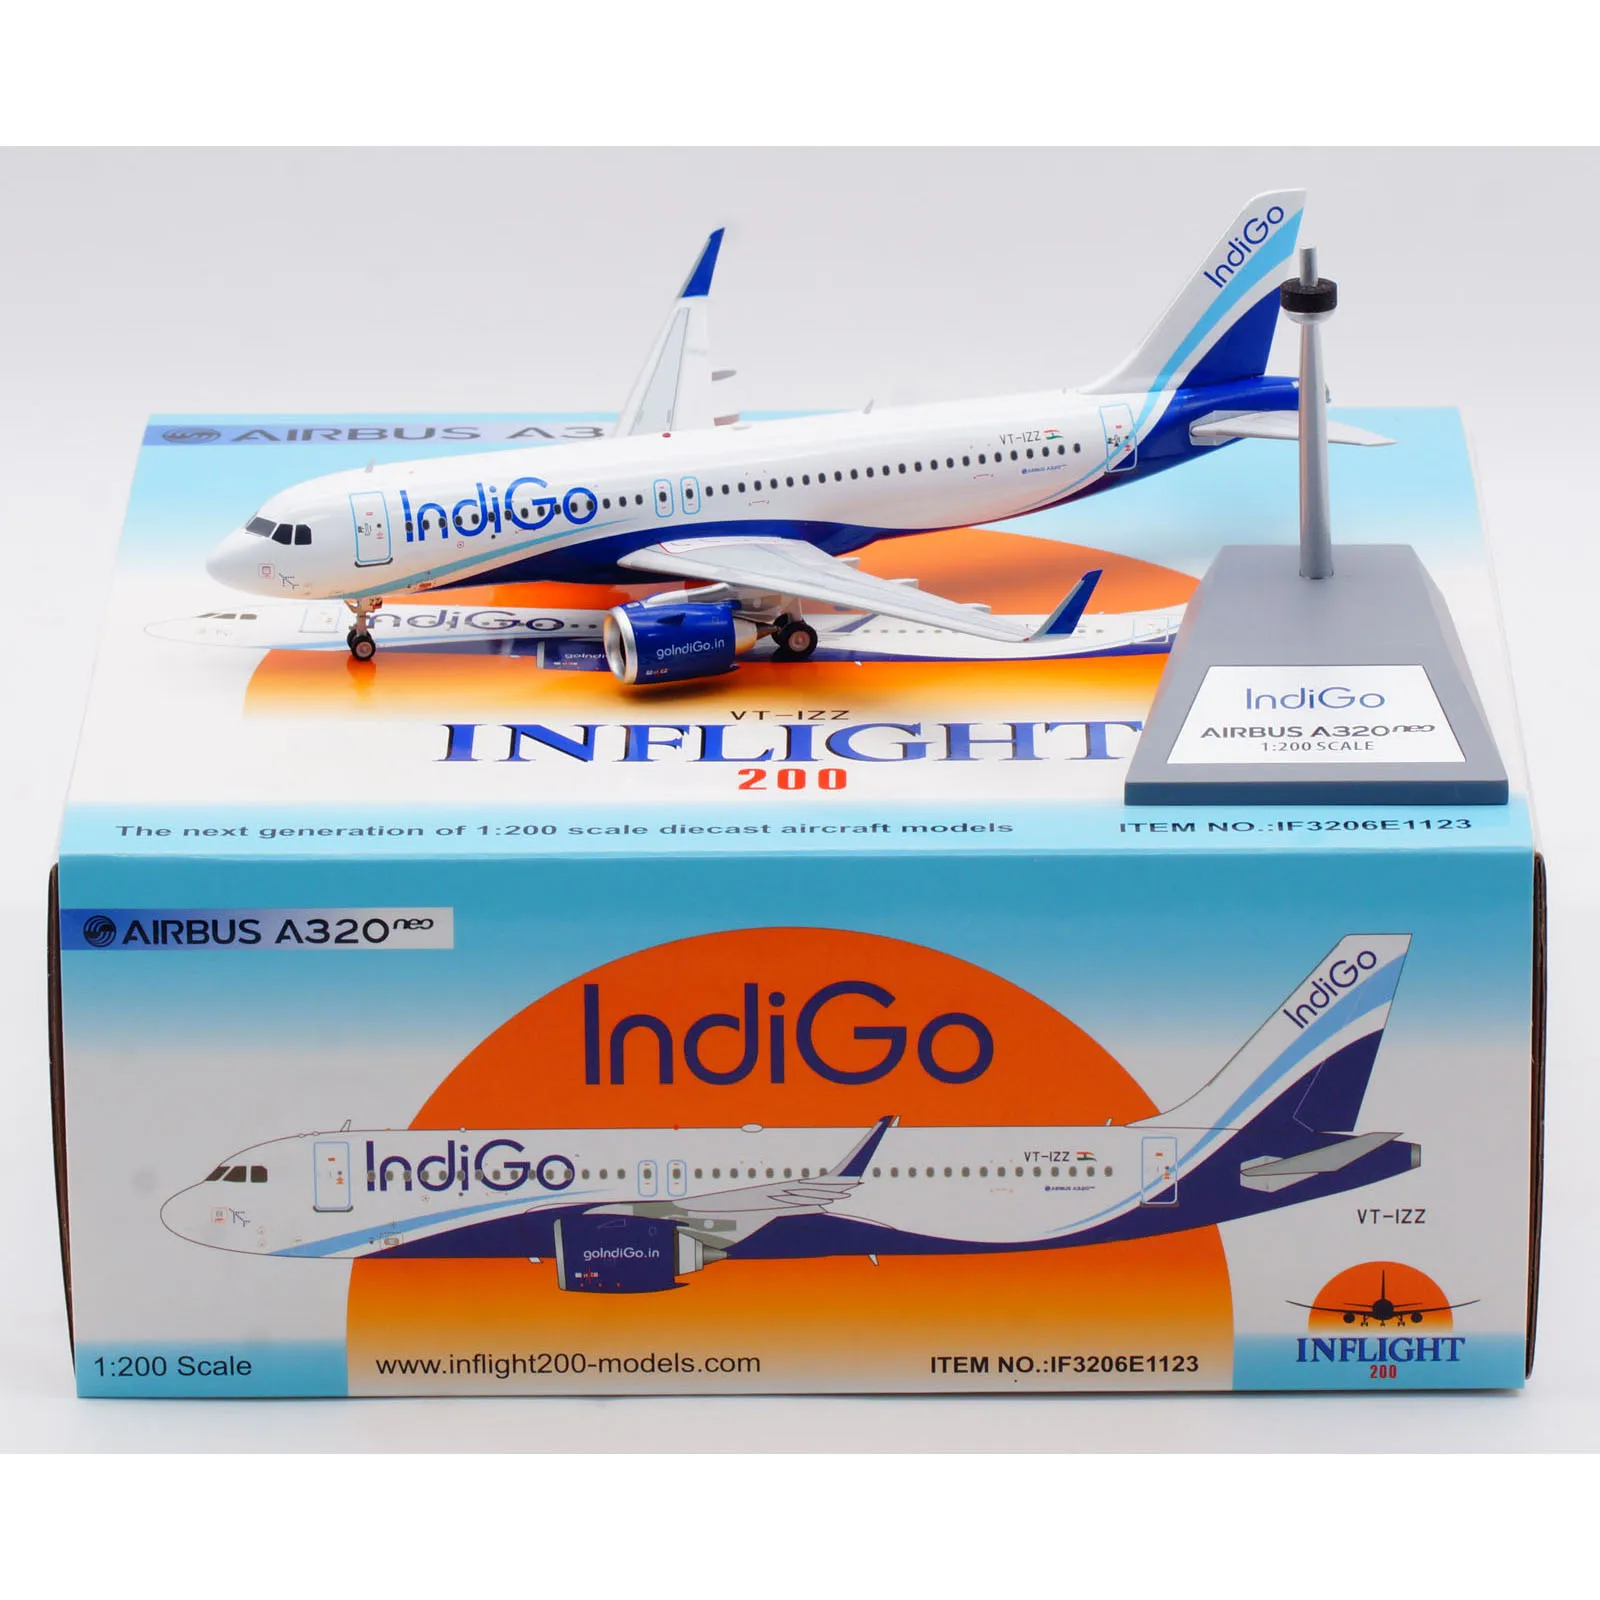 

IF3206E1123 Alloy Collectible Plane Gift INFLIGHT 1:200 IndiGo Airlines Airbus A320 Diecast Aircraft Jet Model VT-IZZ With Stand